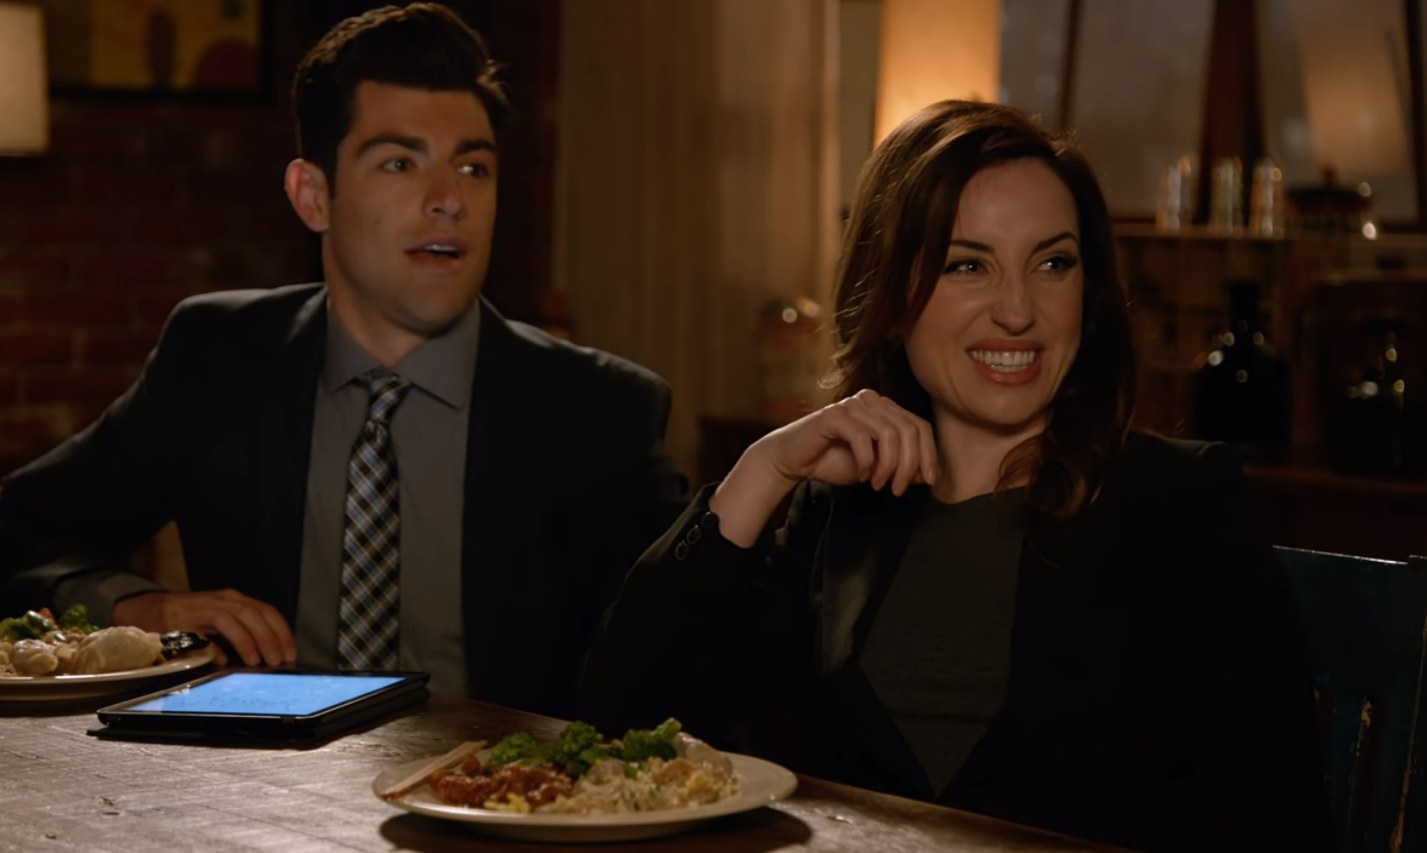 Schmidt and Fawn sit at the dinner table